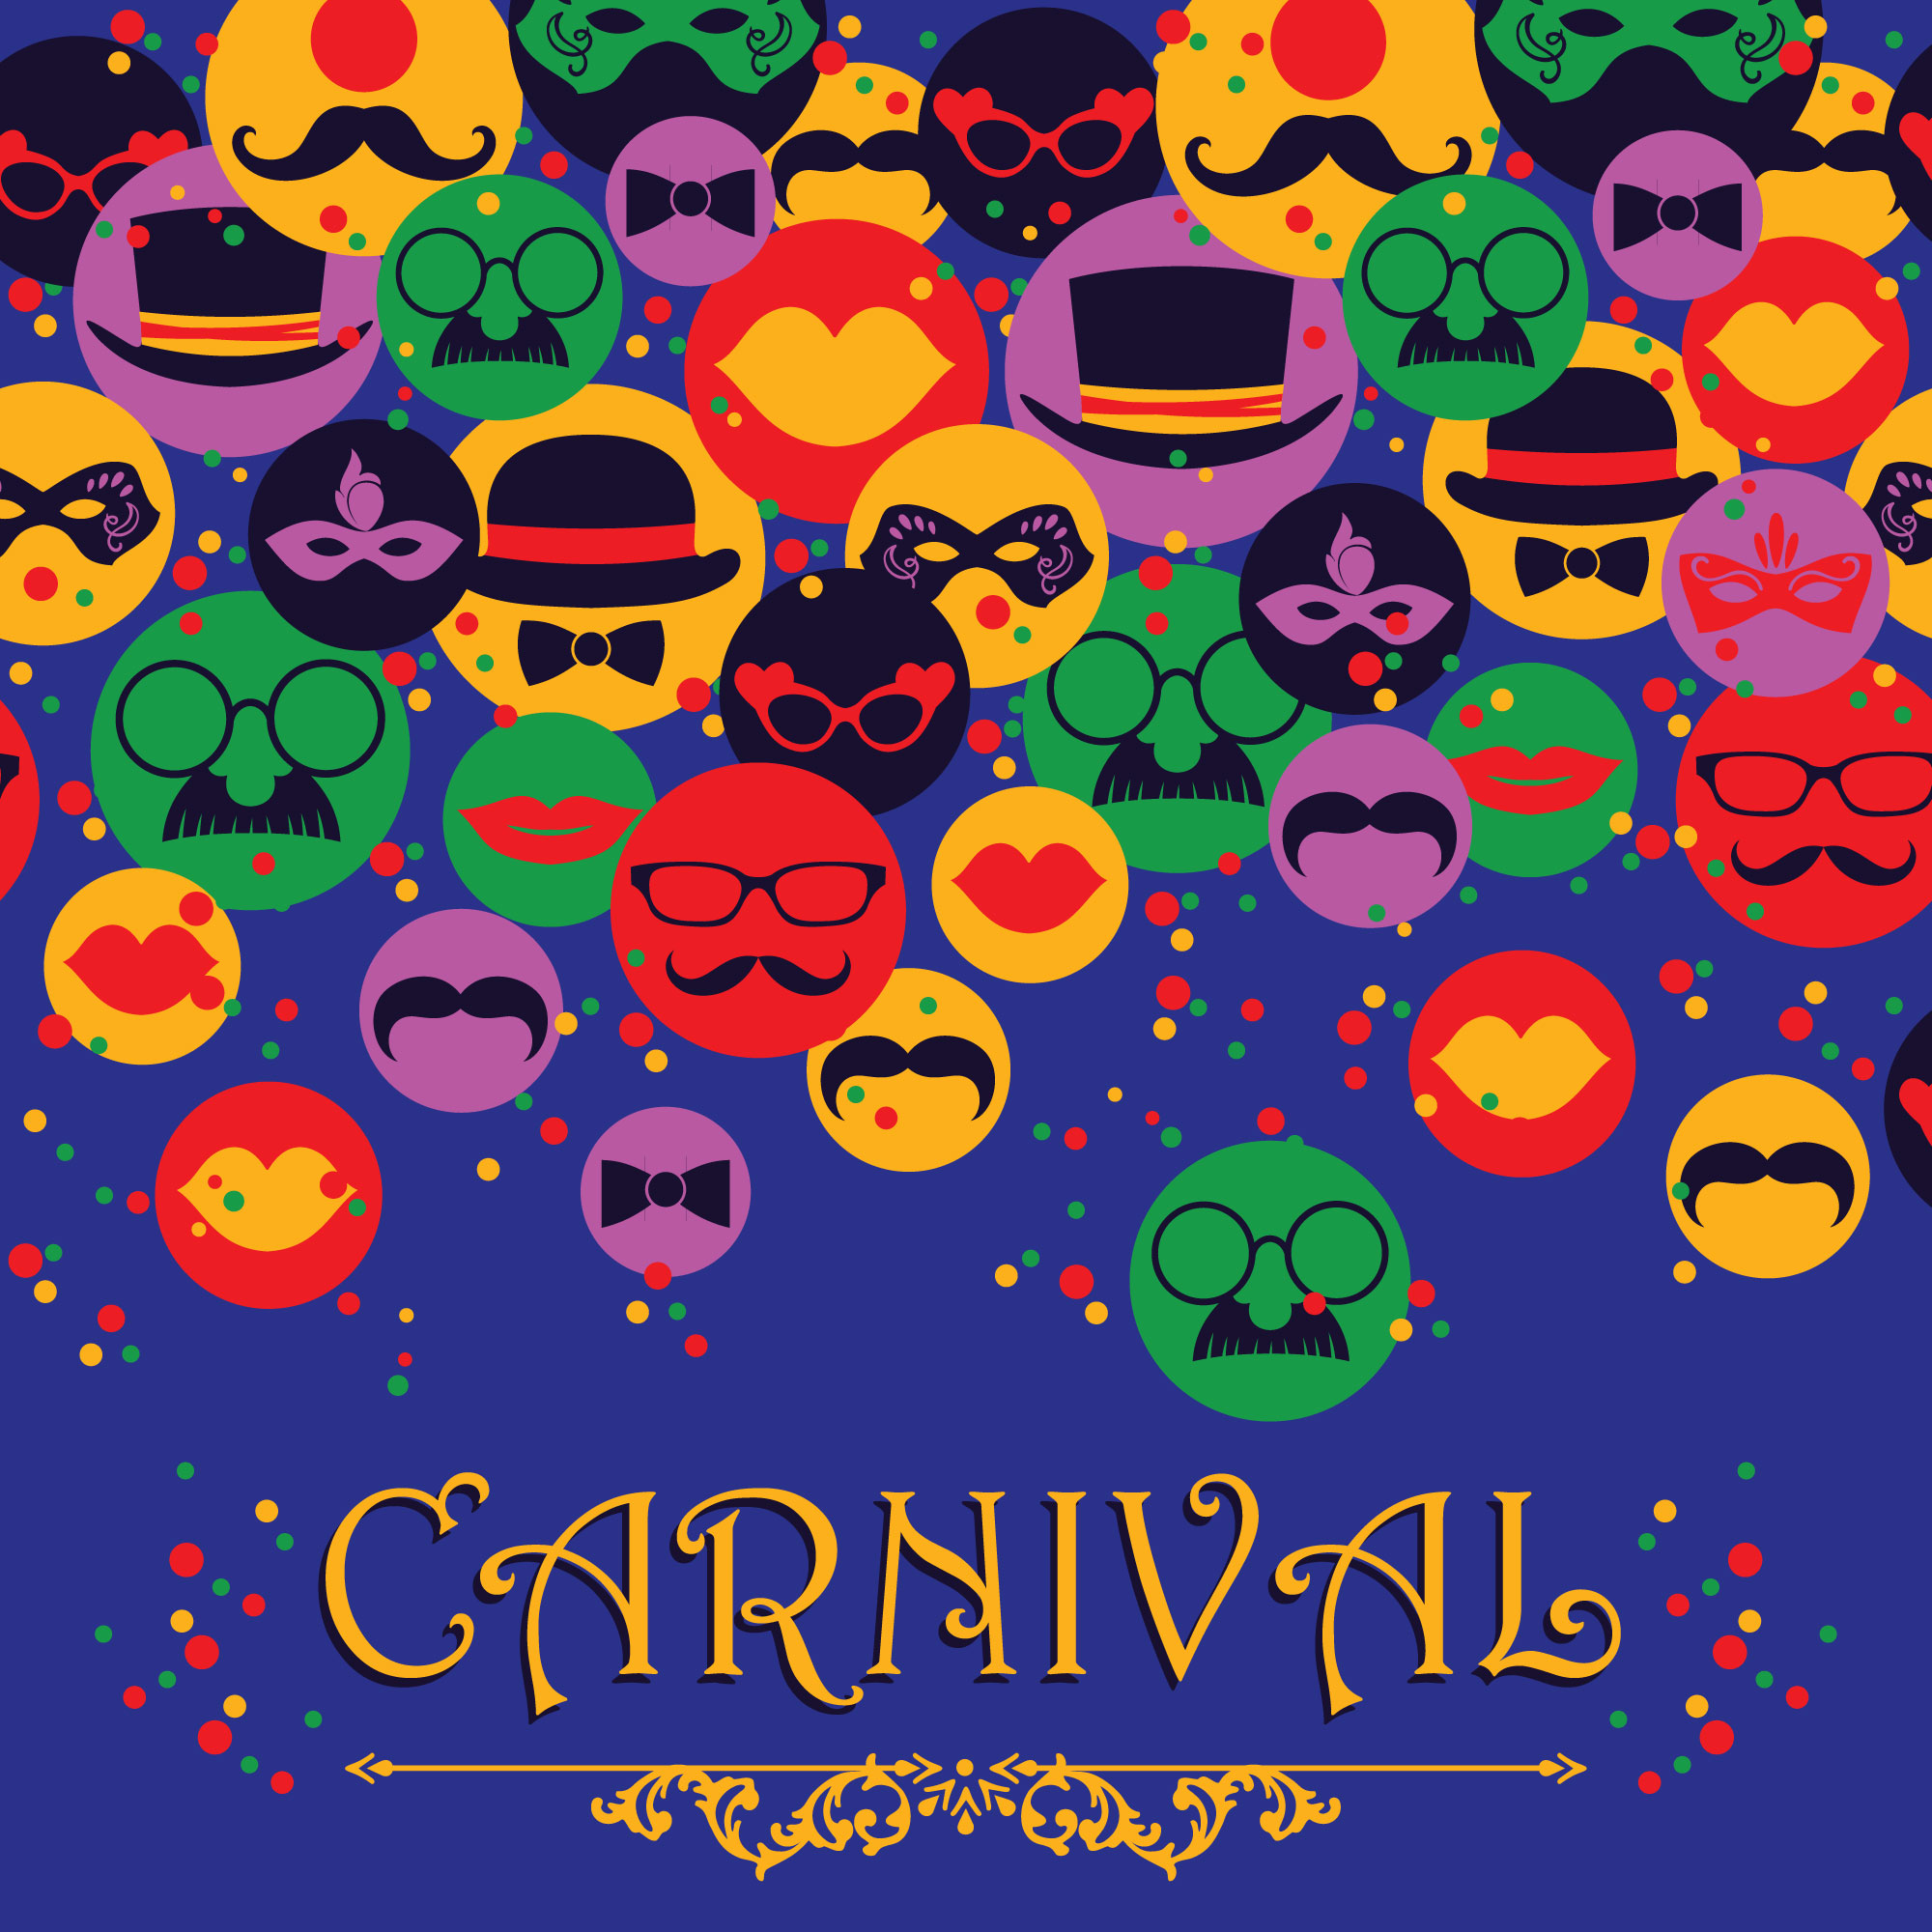 Celebration festive background with carnival icons and objects. Vector illustration Photoshop brush